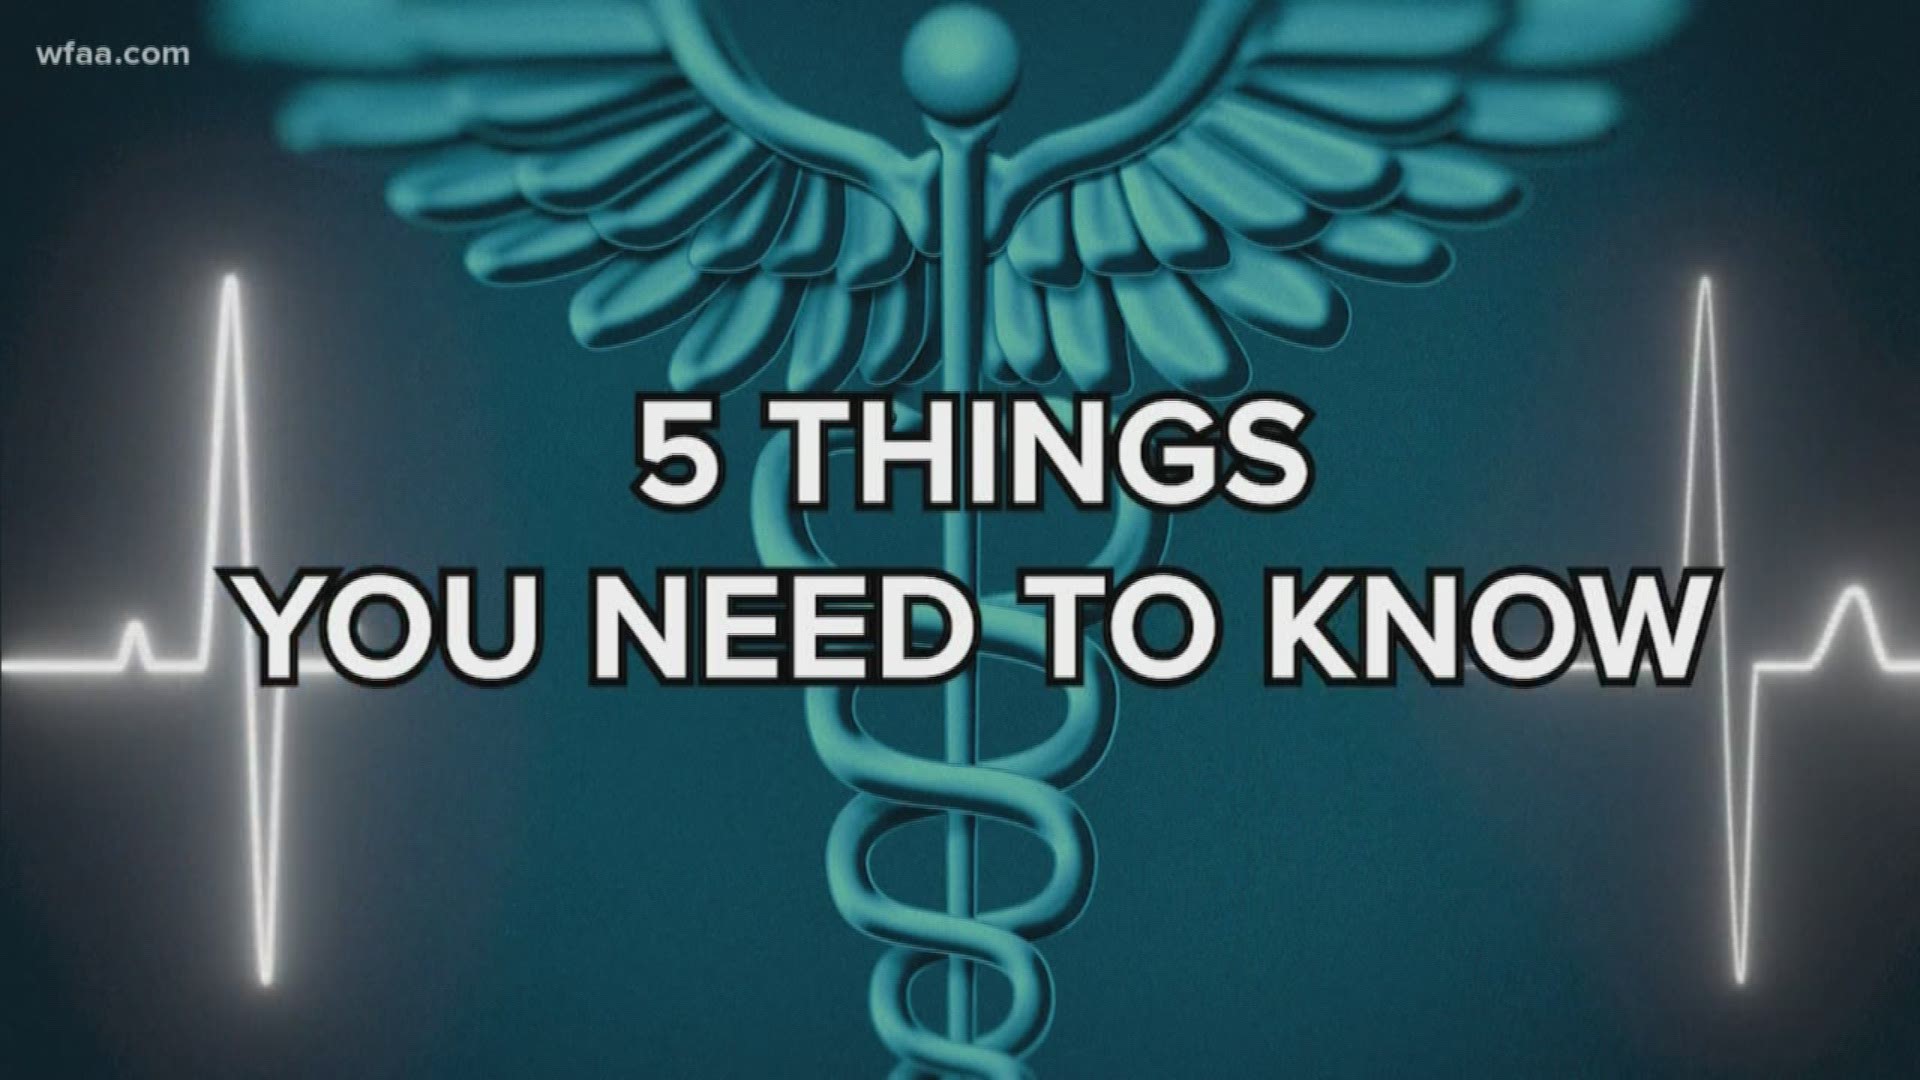 This flu season might be the worst in years. Here are 5 things you need to know about how serious it is and what you should do about it.